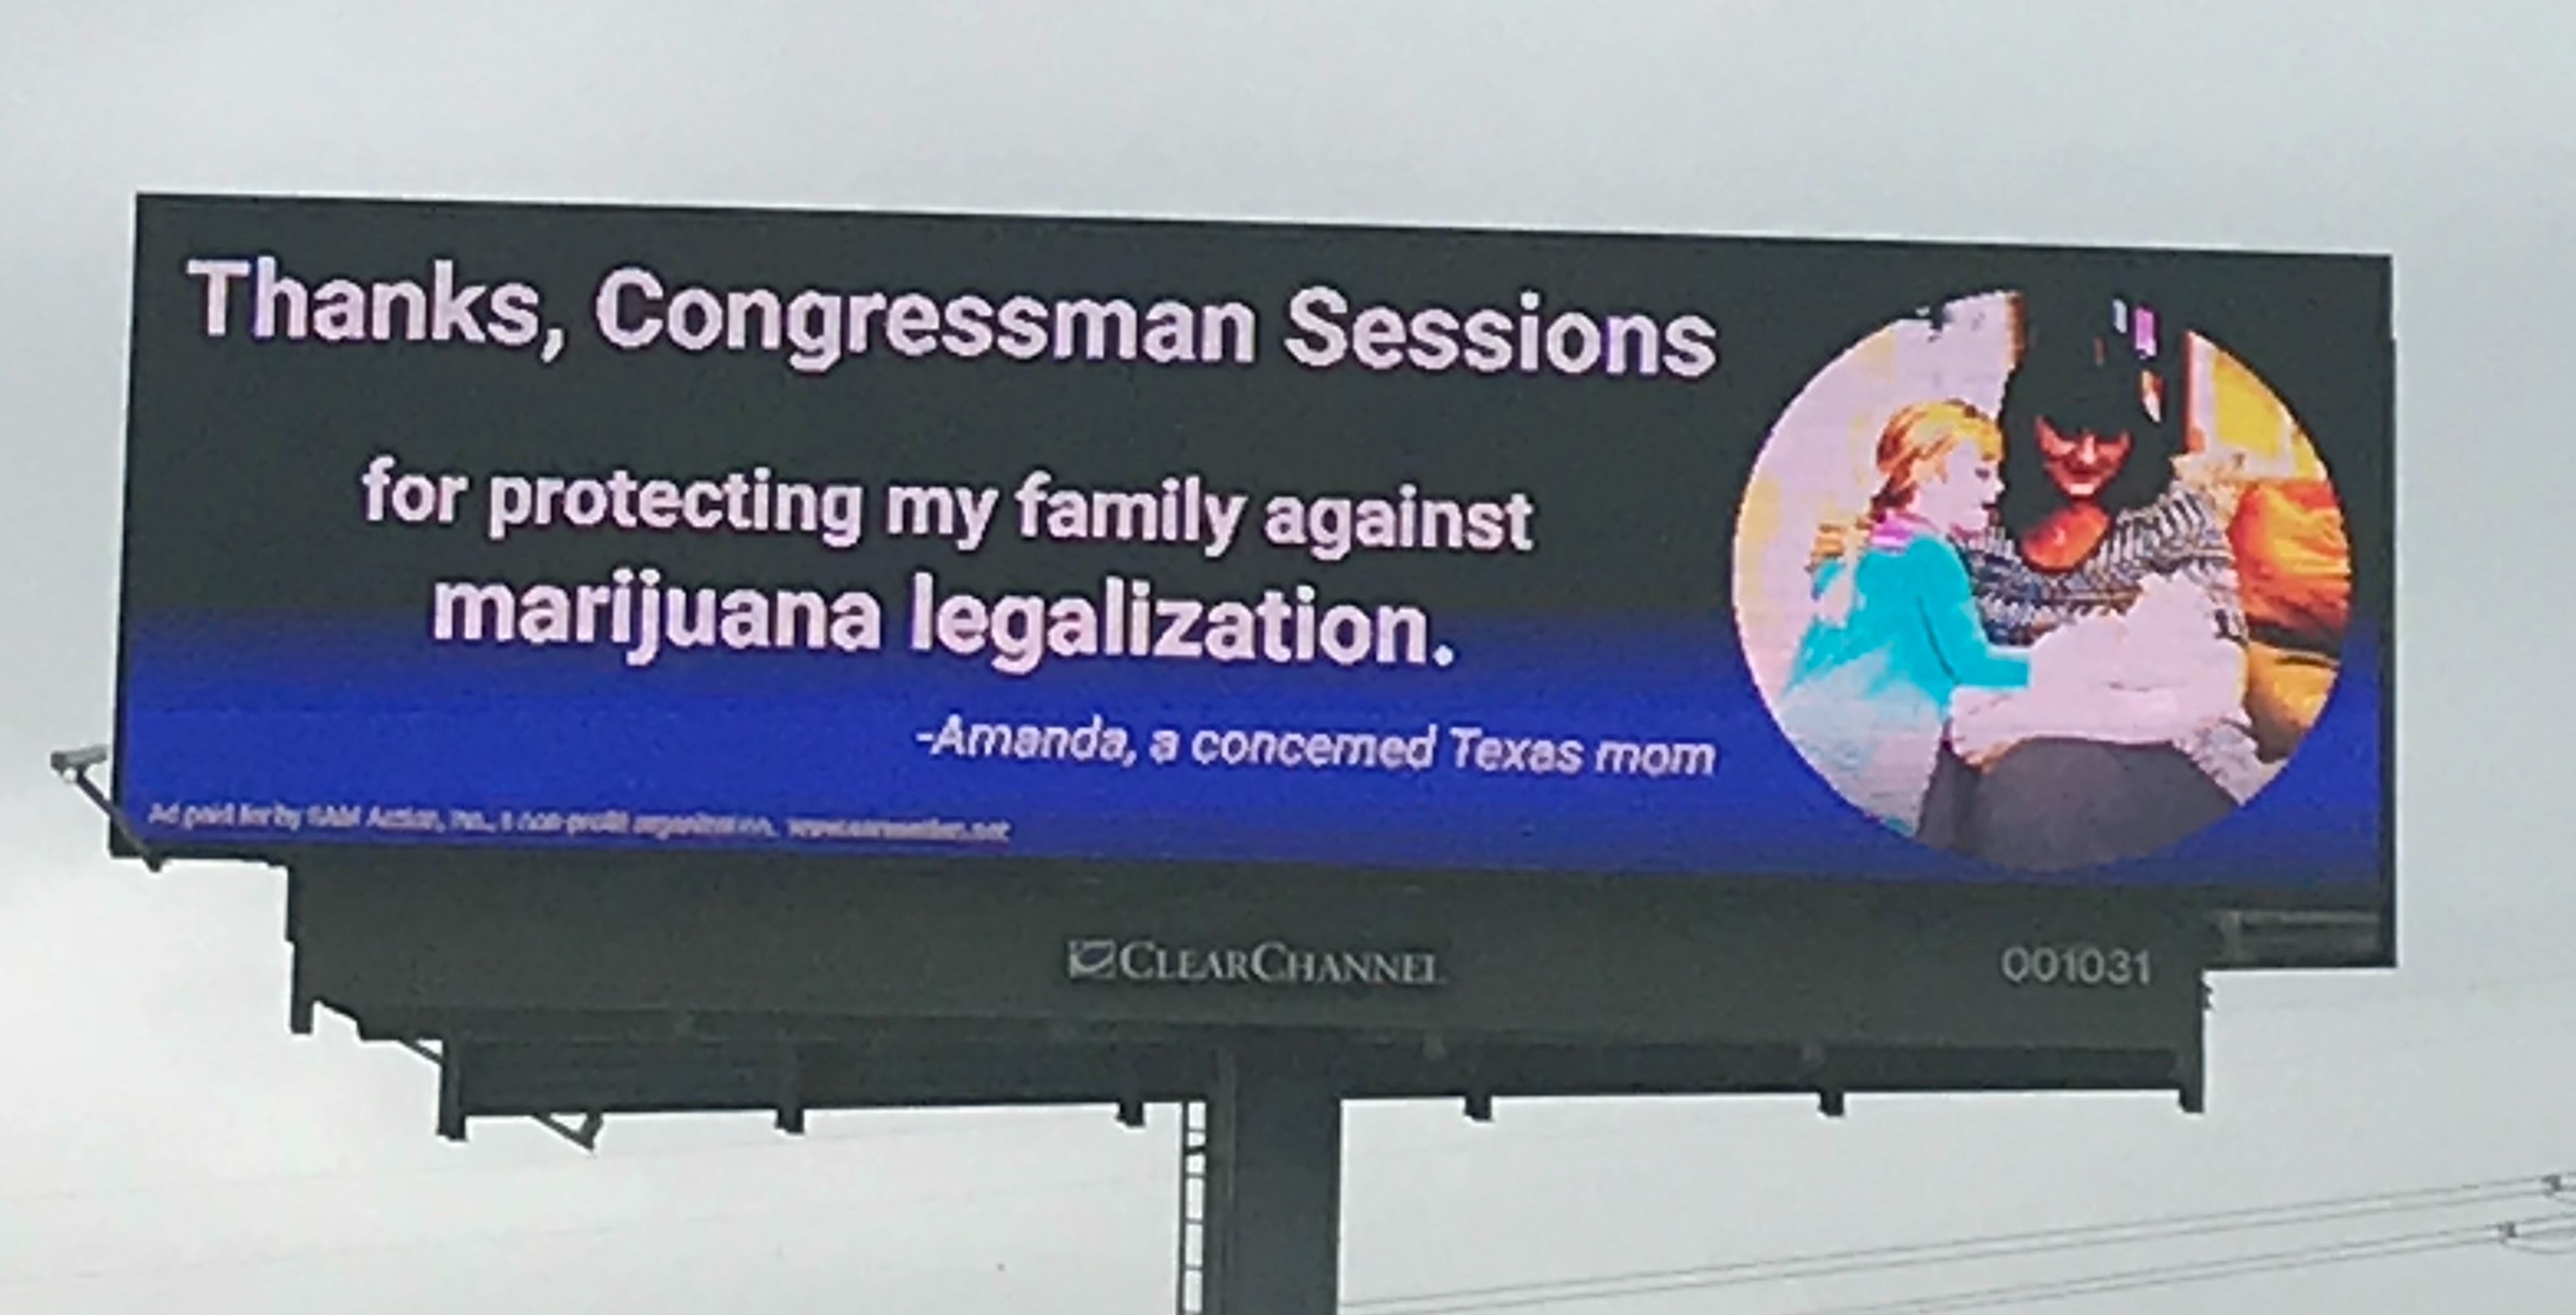 Thank You, Congressman Sessions!